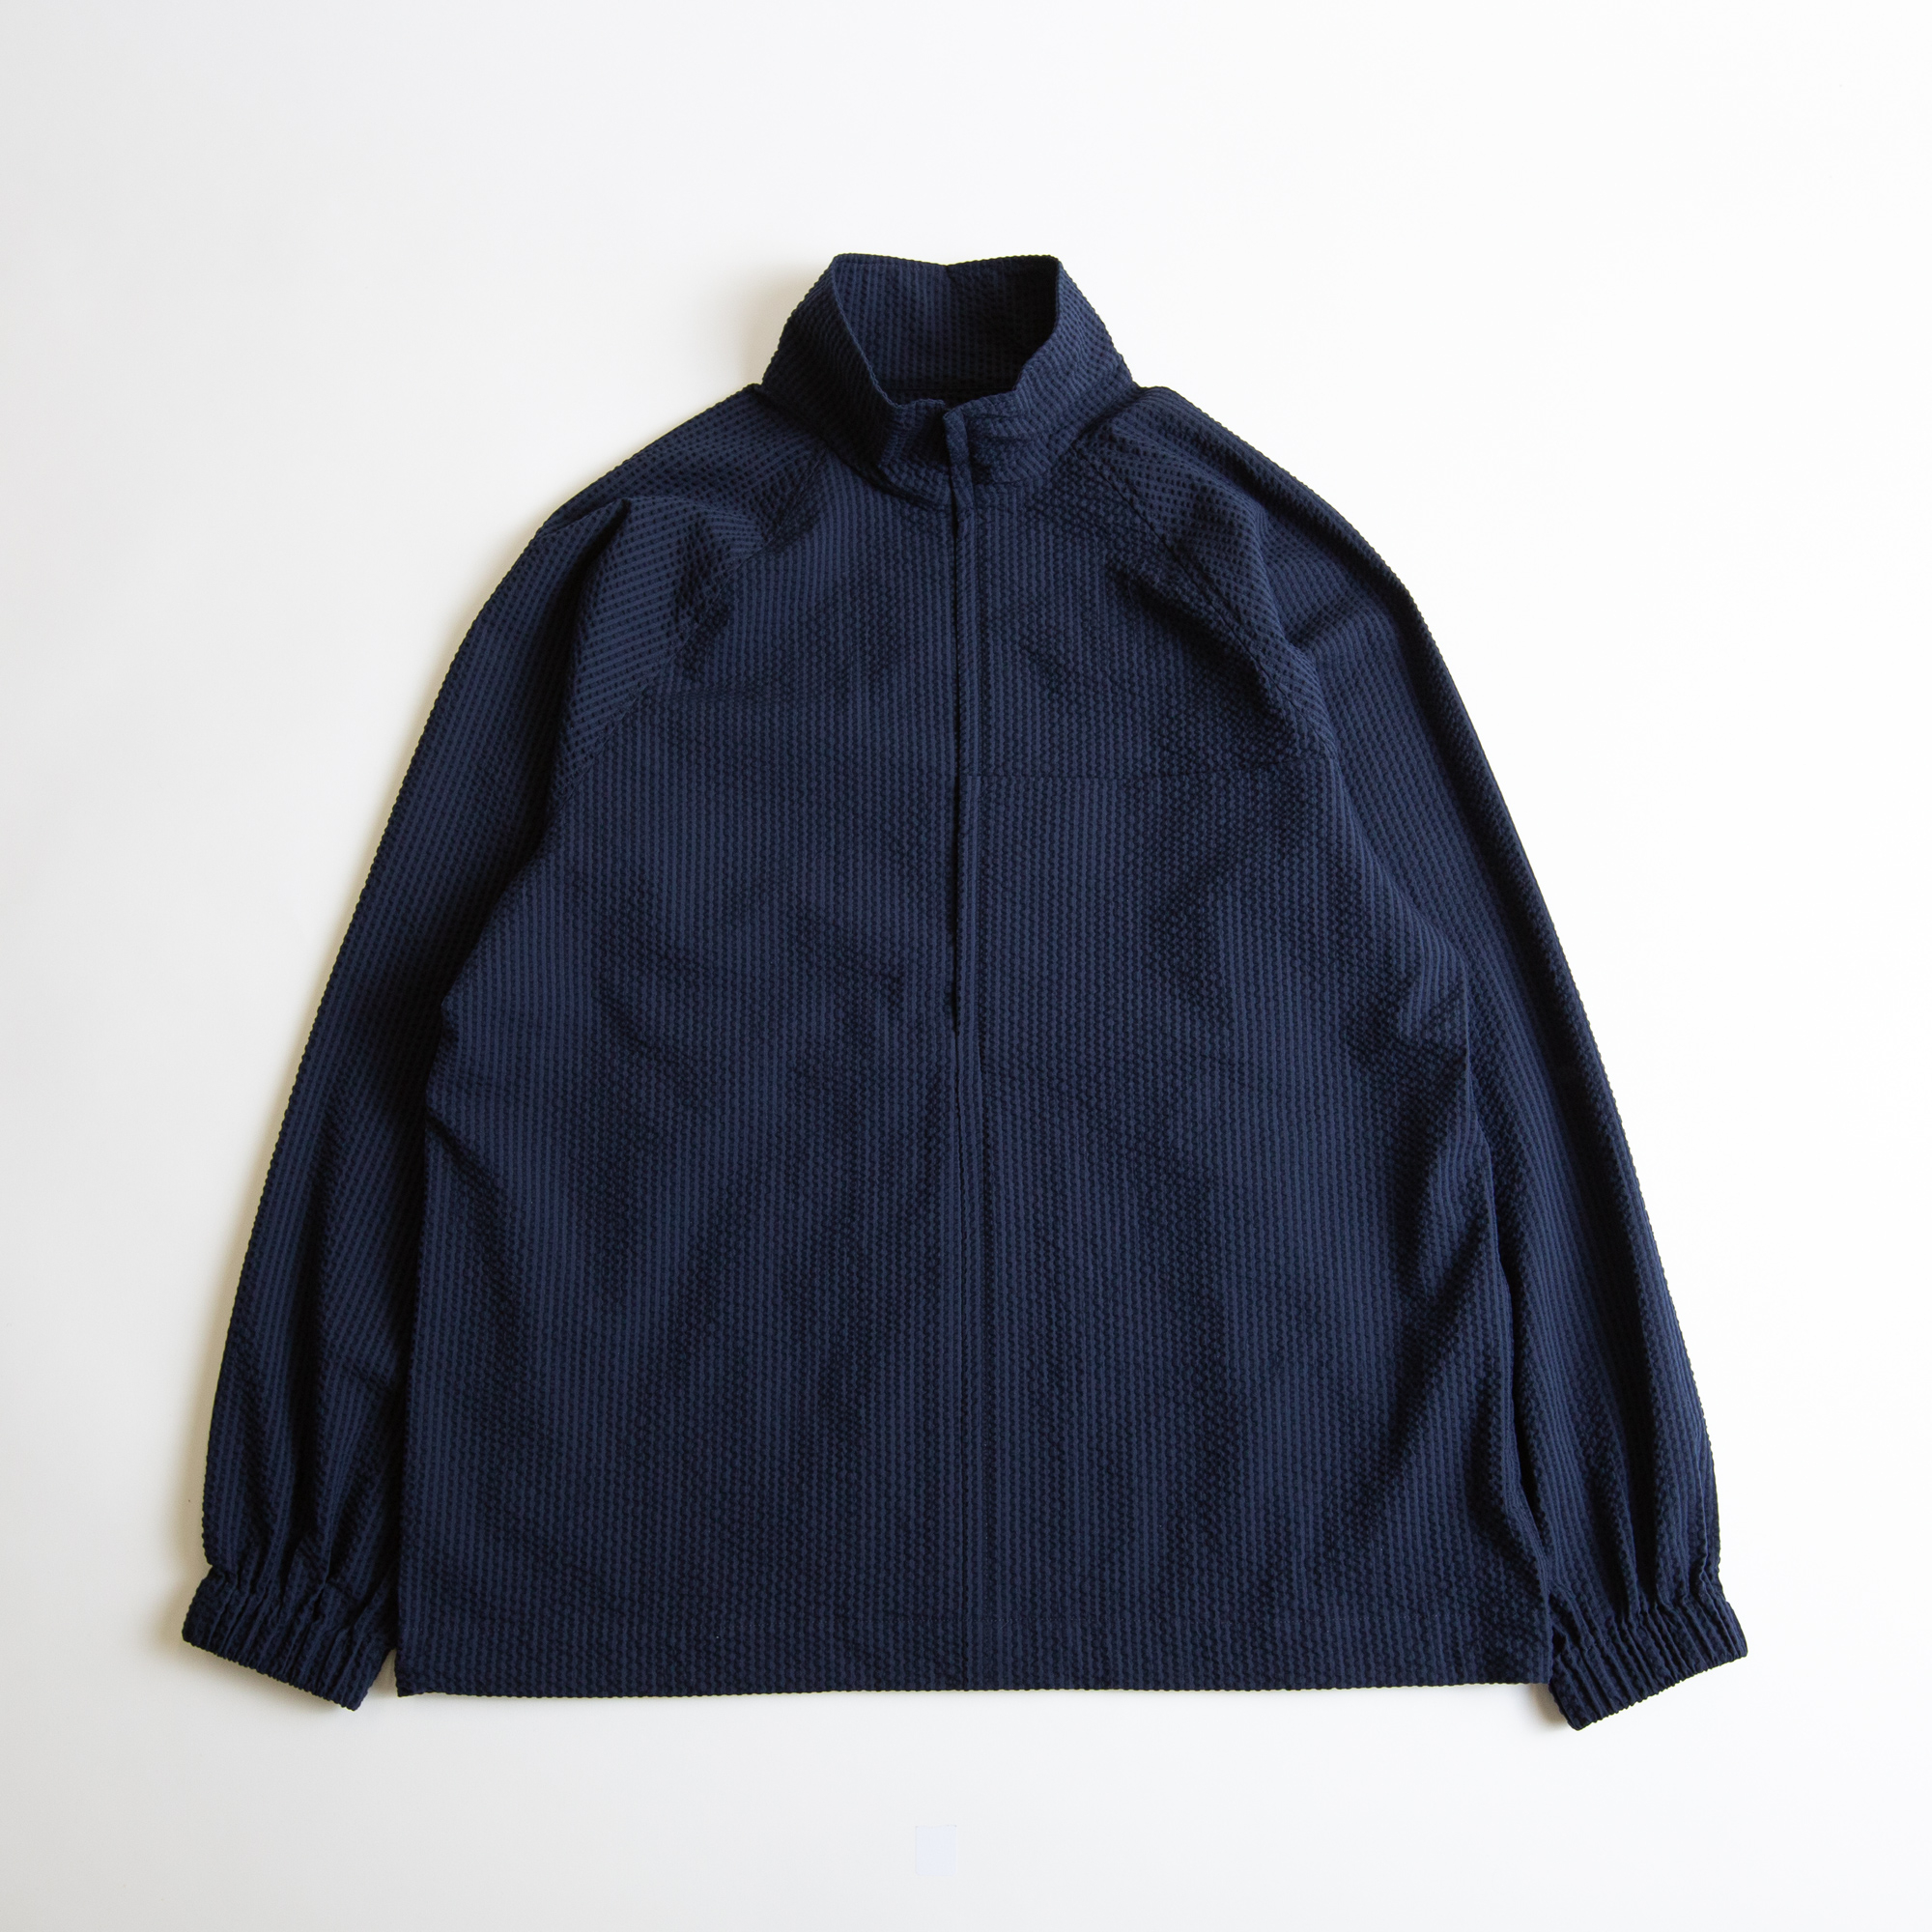 TRACK in Navy color by Arpenteur